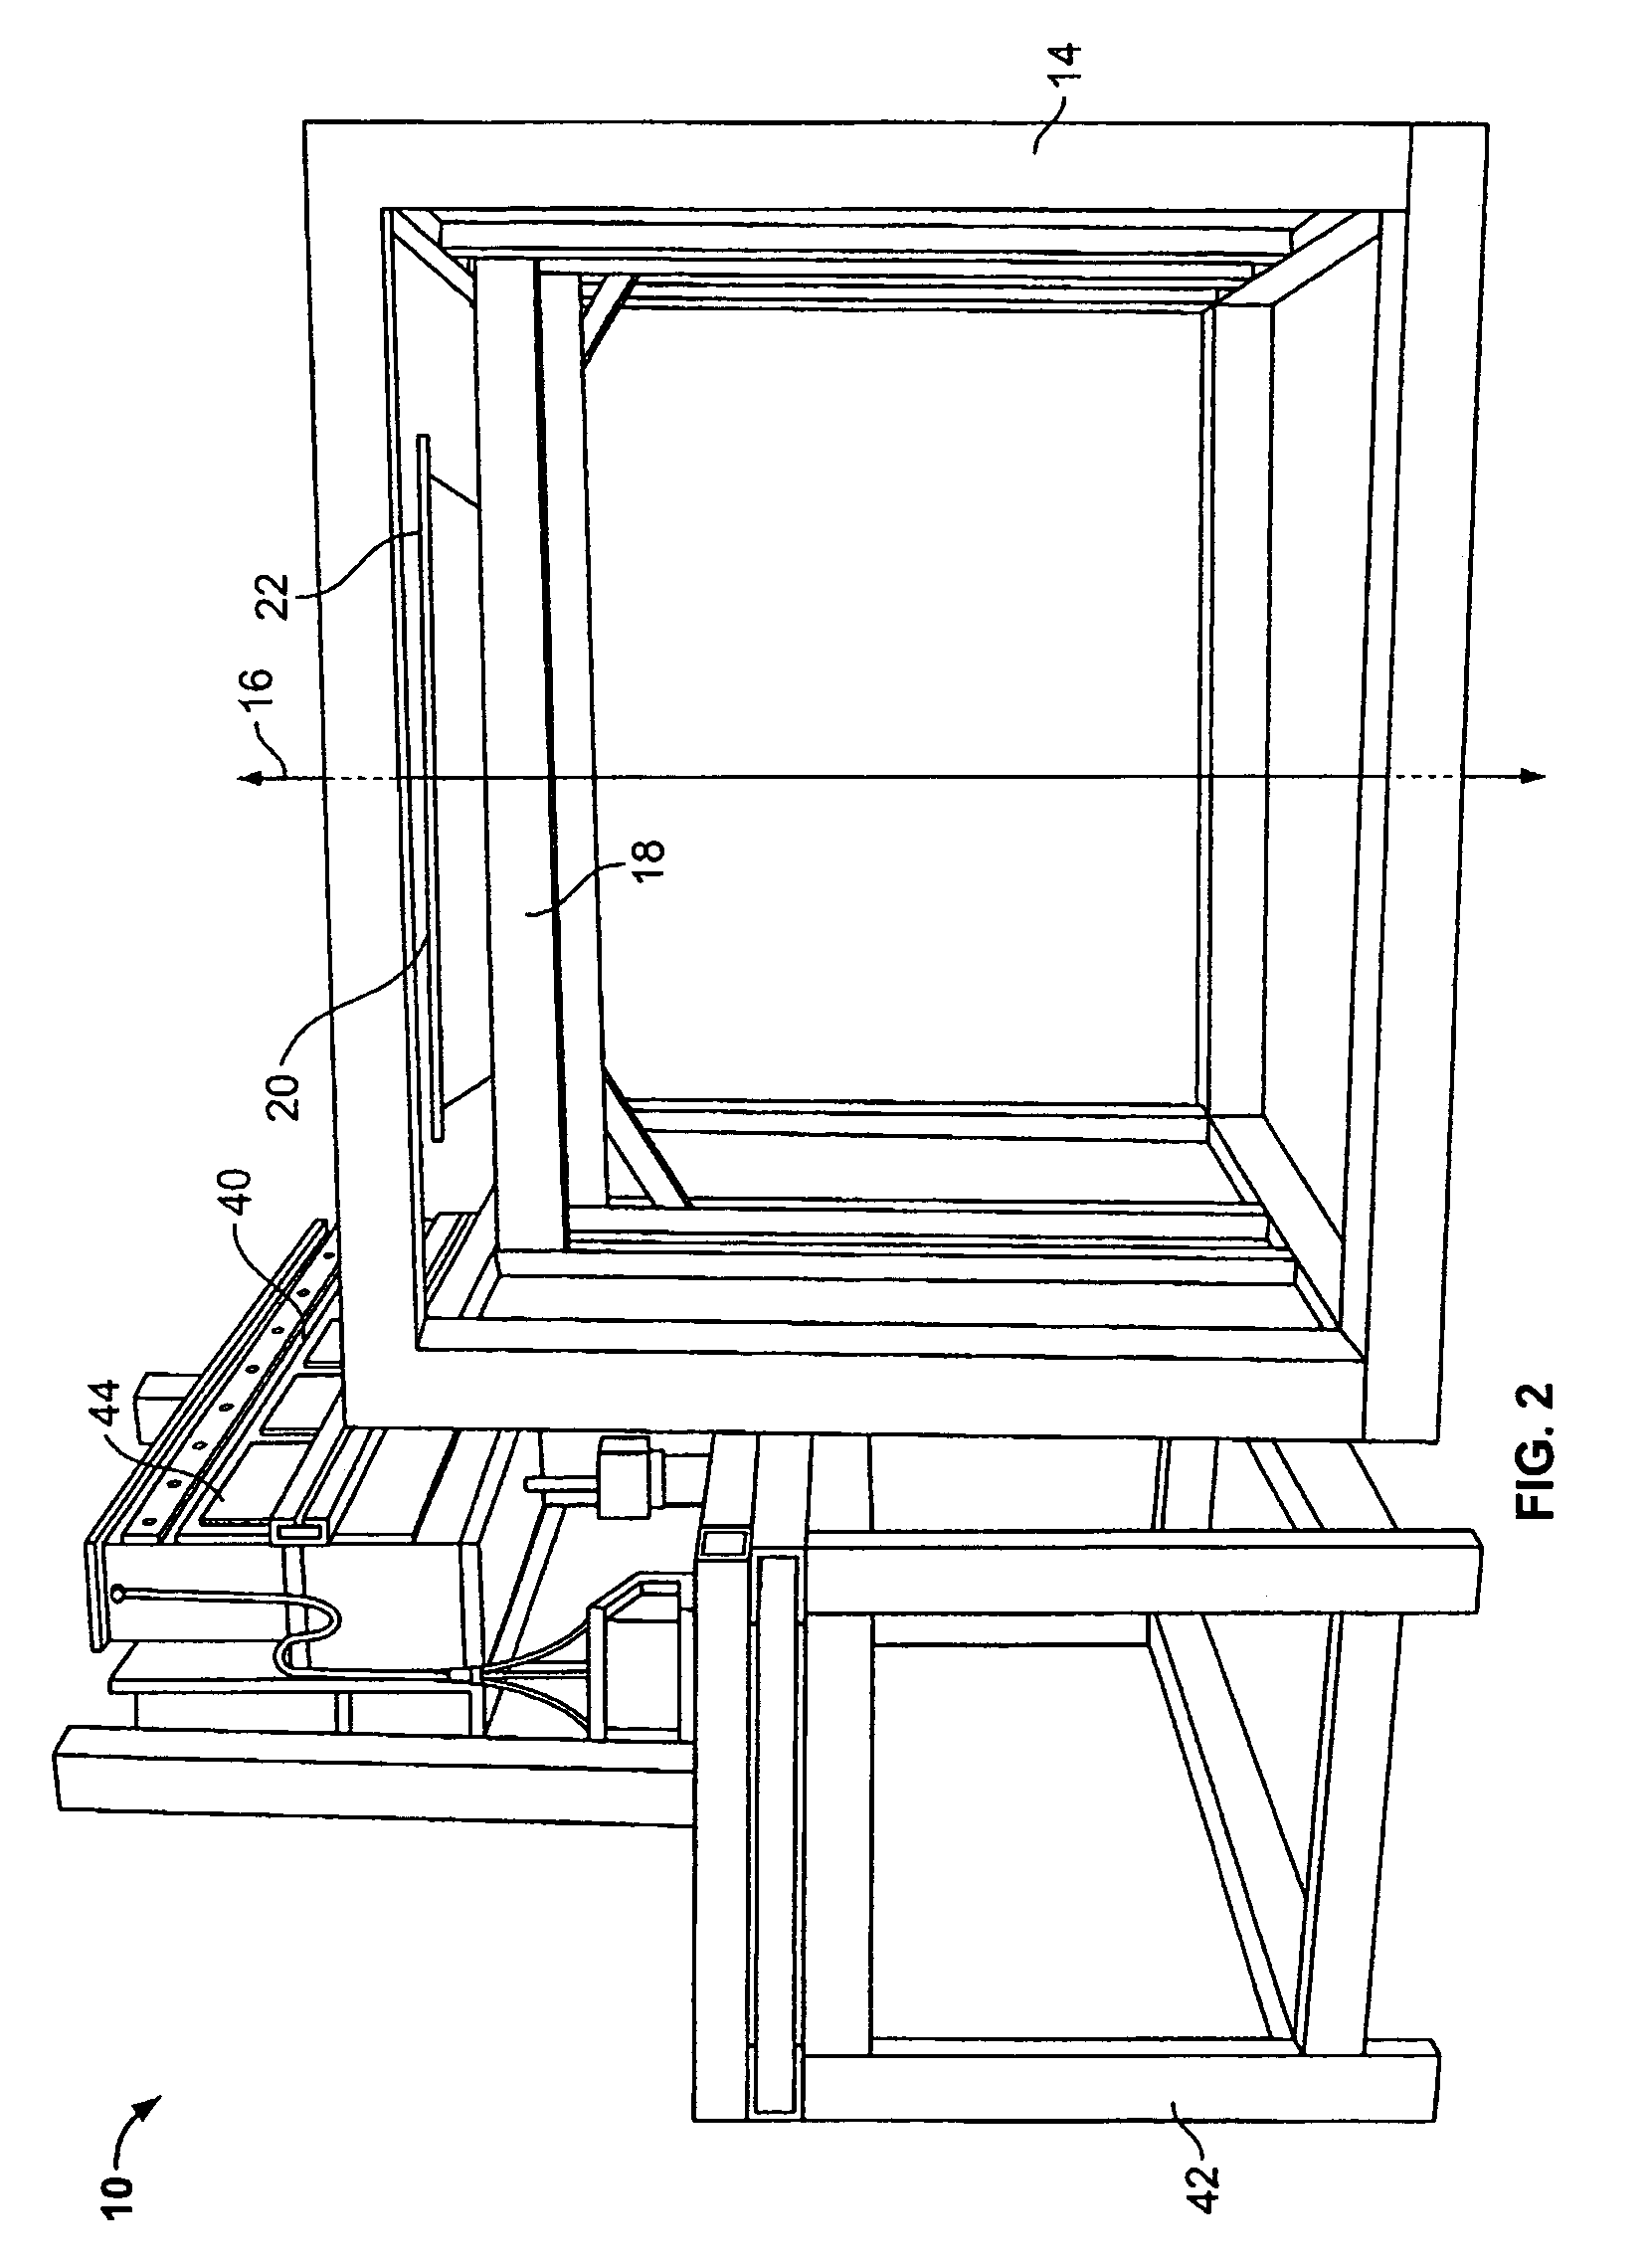 Computed tomography cargo inspection system and method